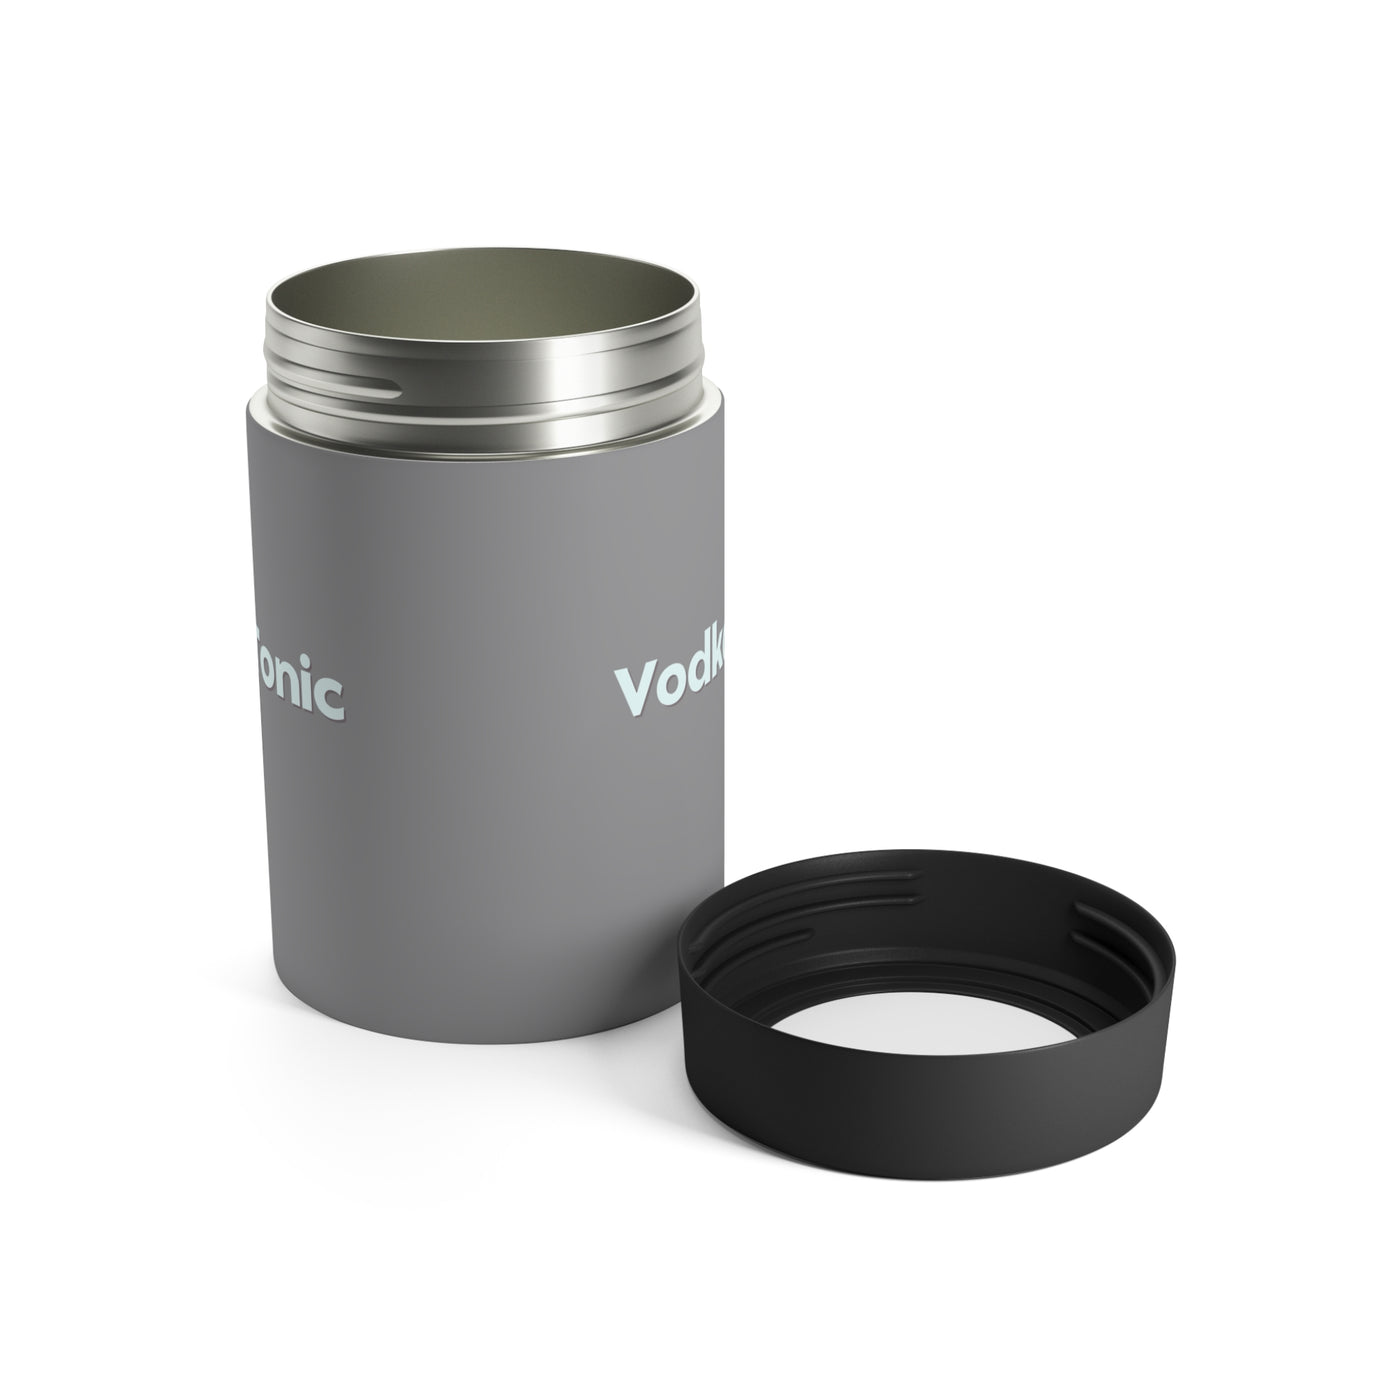 Vodka Tonic Stainless Steel Can Holder